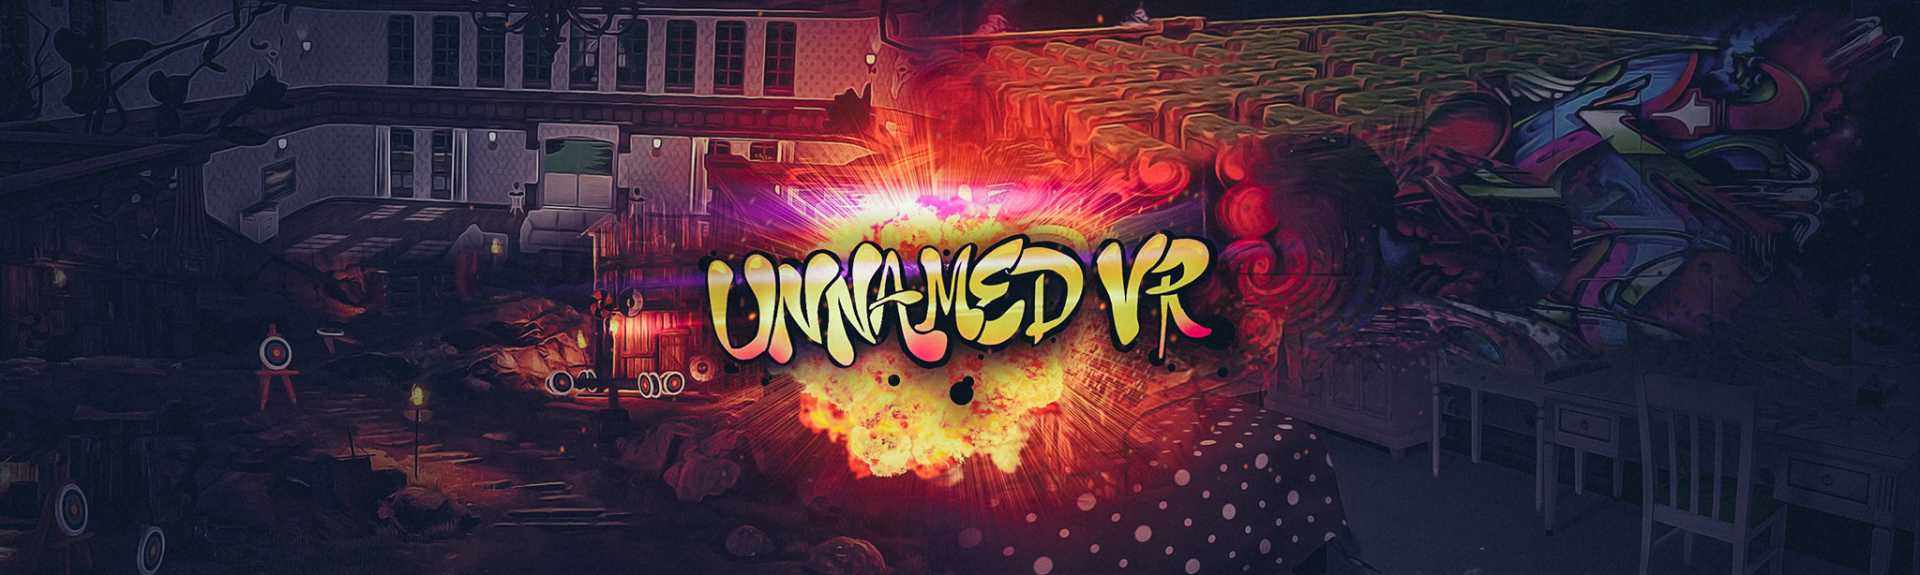 Unnamed VR